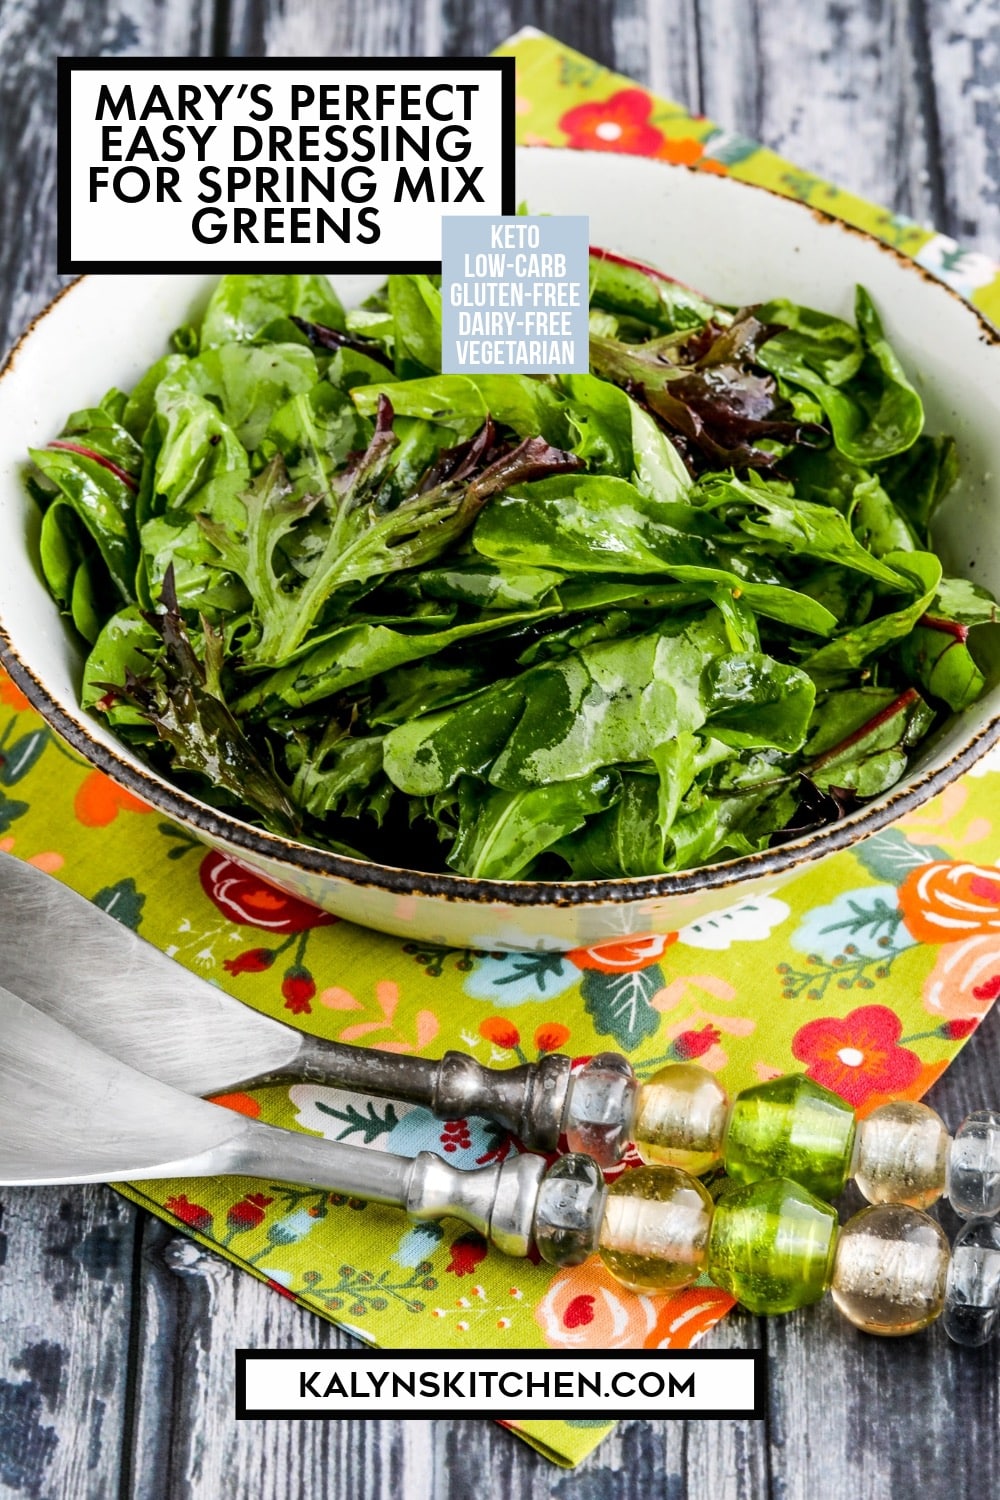 Pinterest image of Mary's Perfect Easy Dressing for Spring Mix Greens